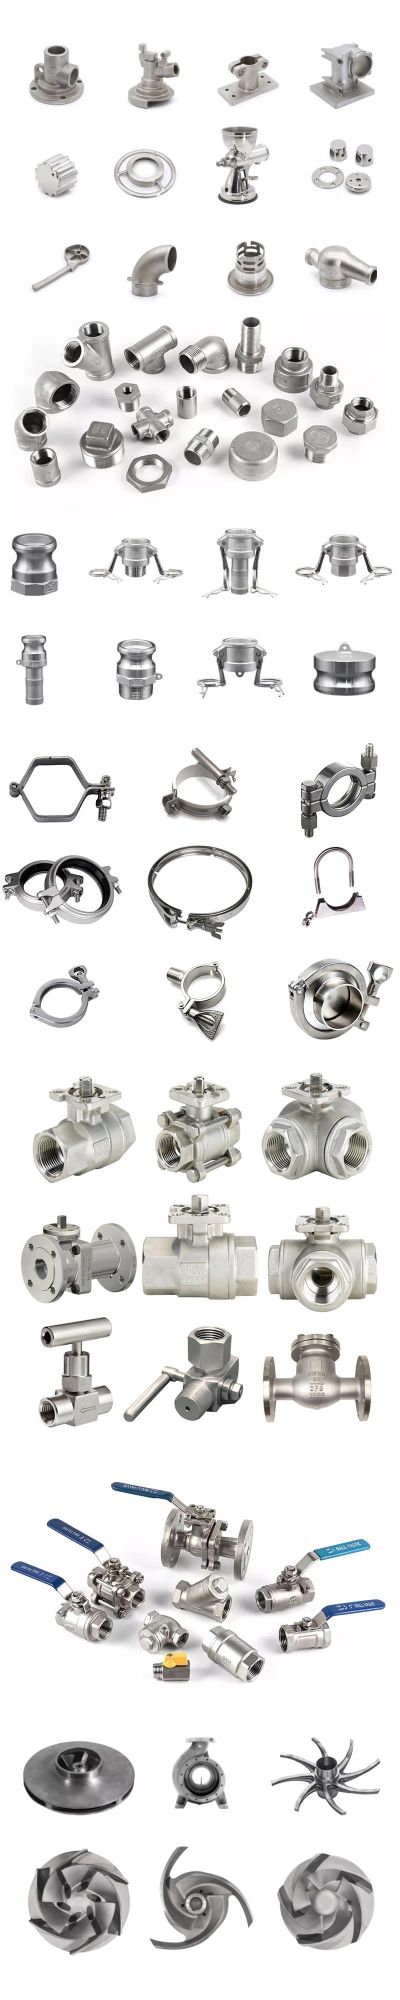 Petroleum Machinery Parts OEM Customize Your Drawing Stainless Steel Durable and Anti-Rust CNC Machinery Manufacturer